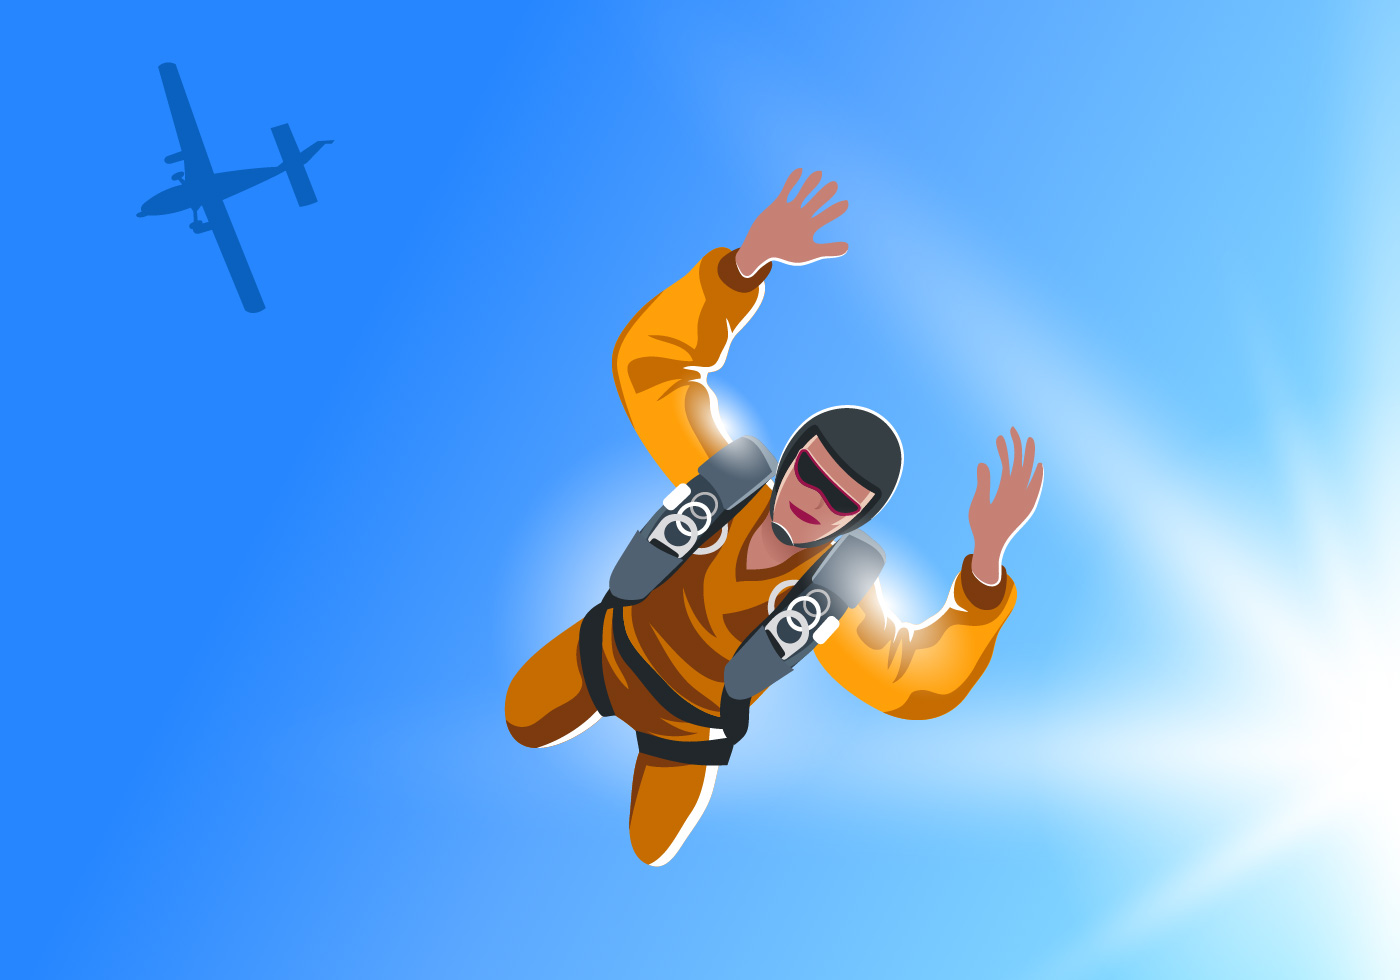 Download the Skydiver Jumping From Plane Vector 158589